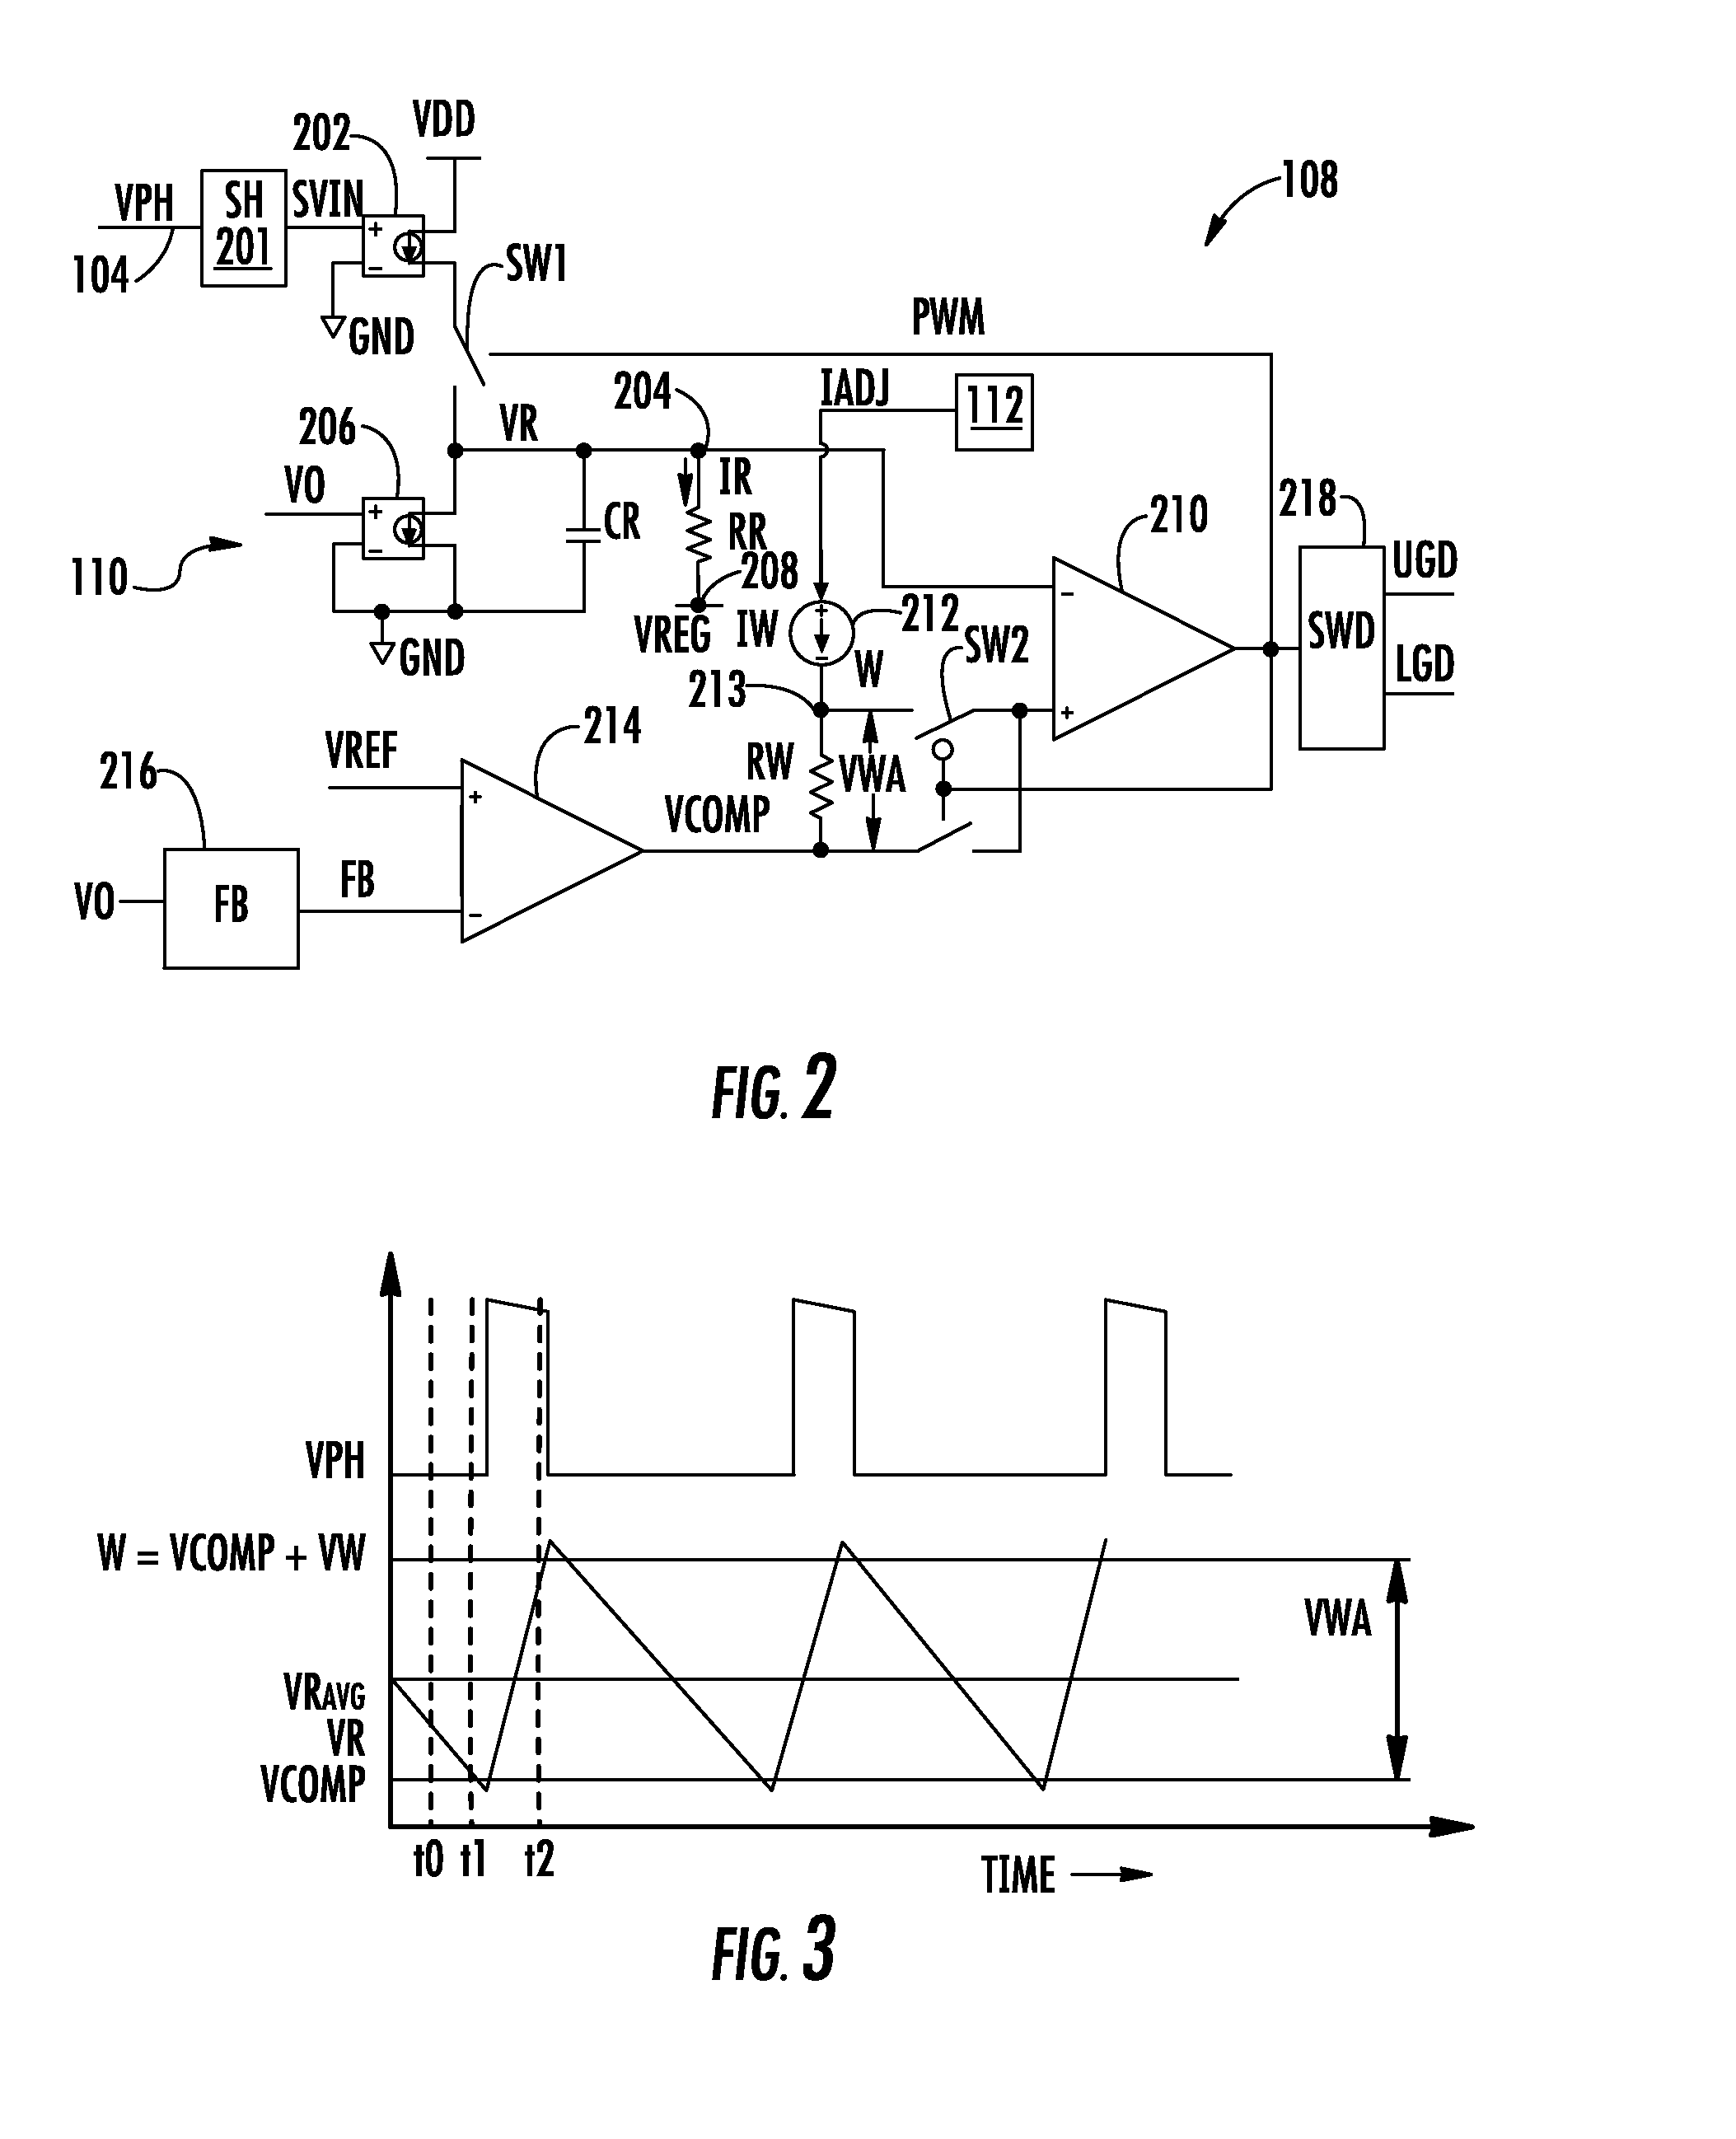 Steady state frequency control of variable frequency switching regulators